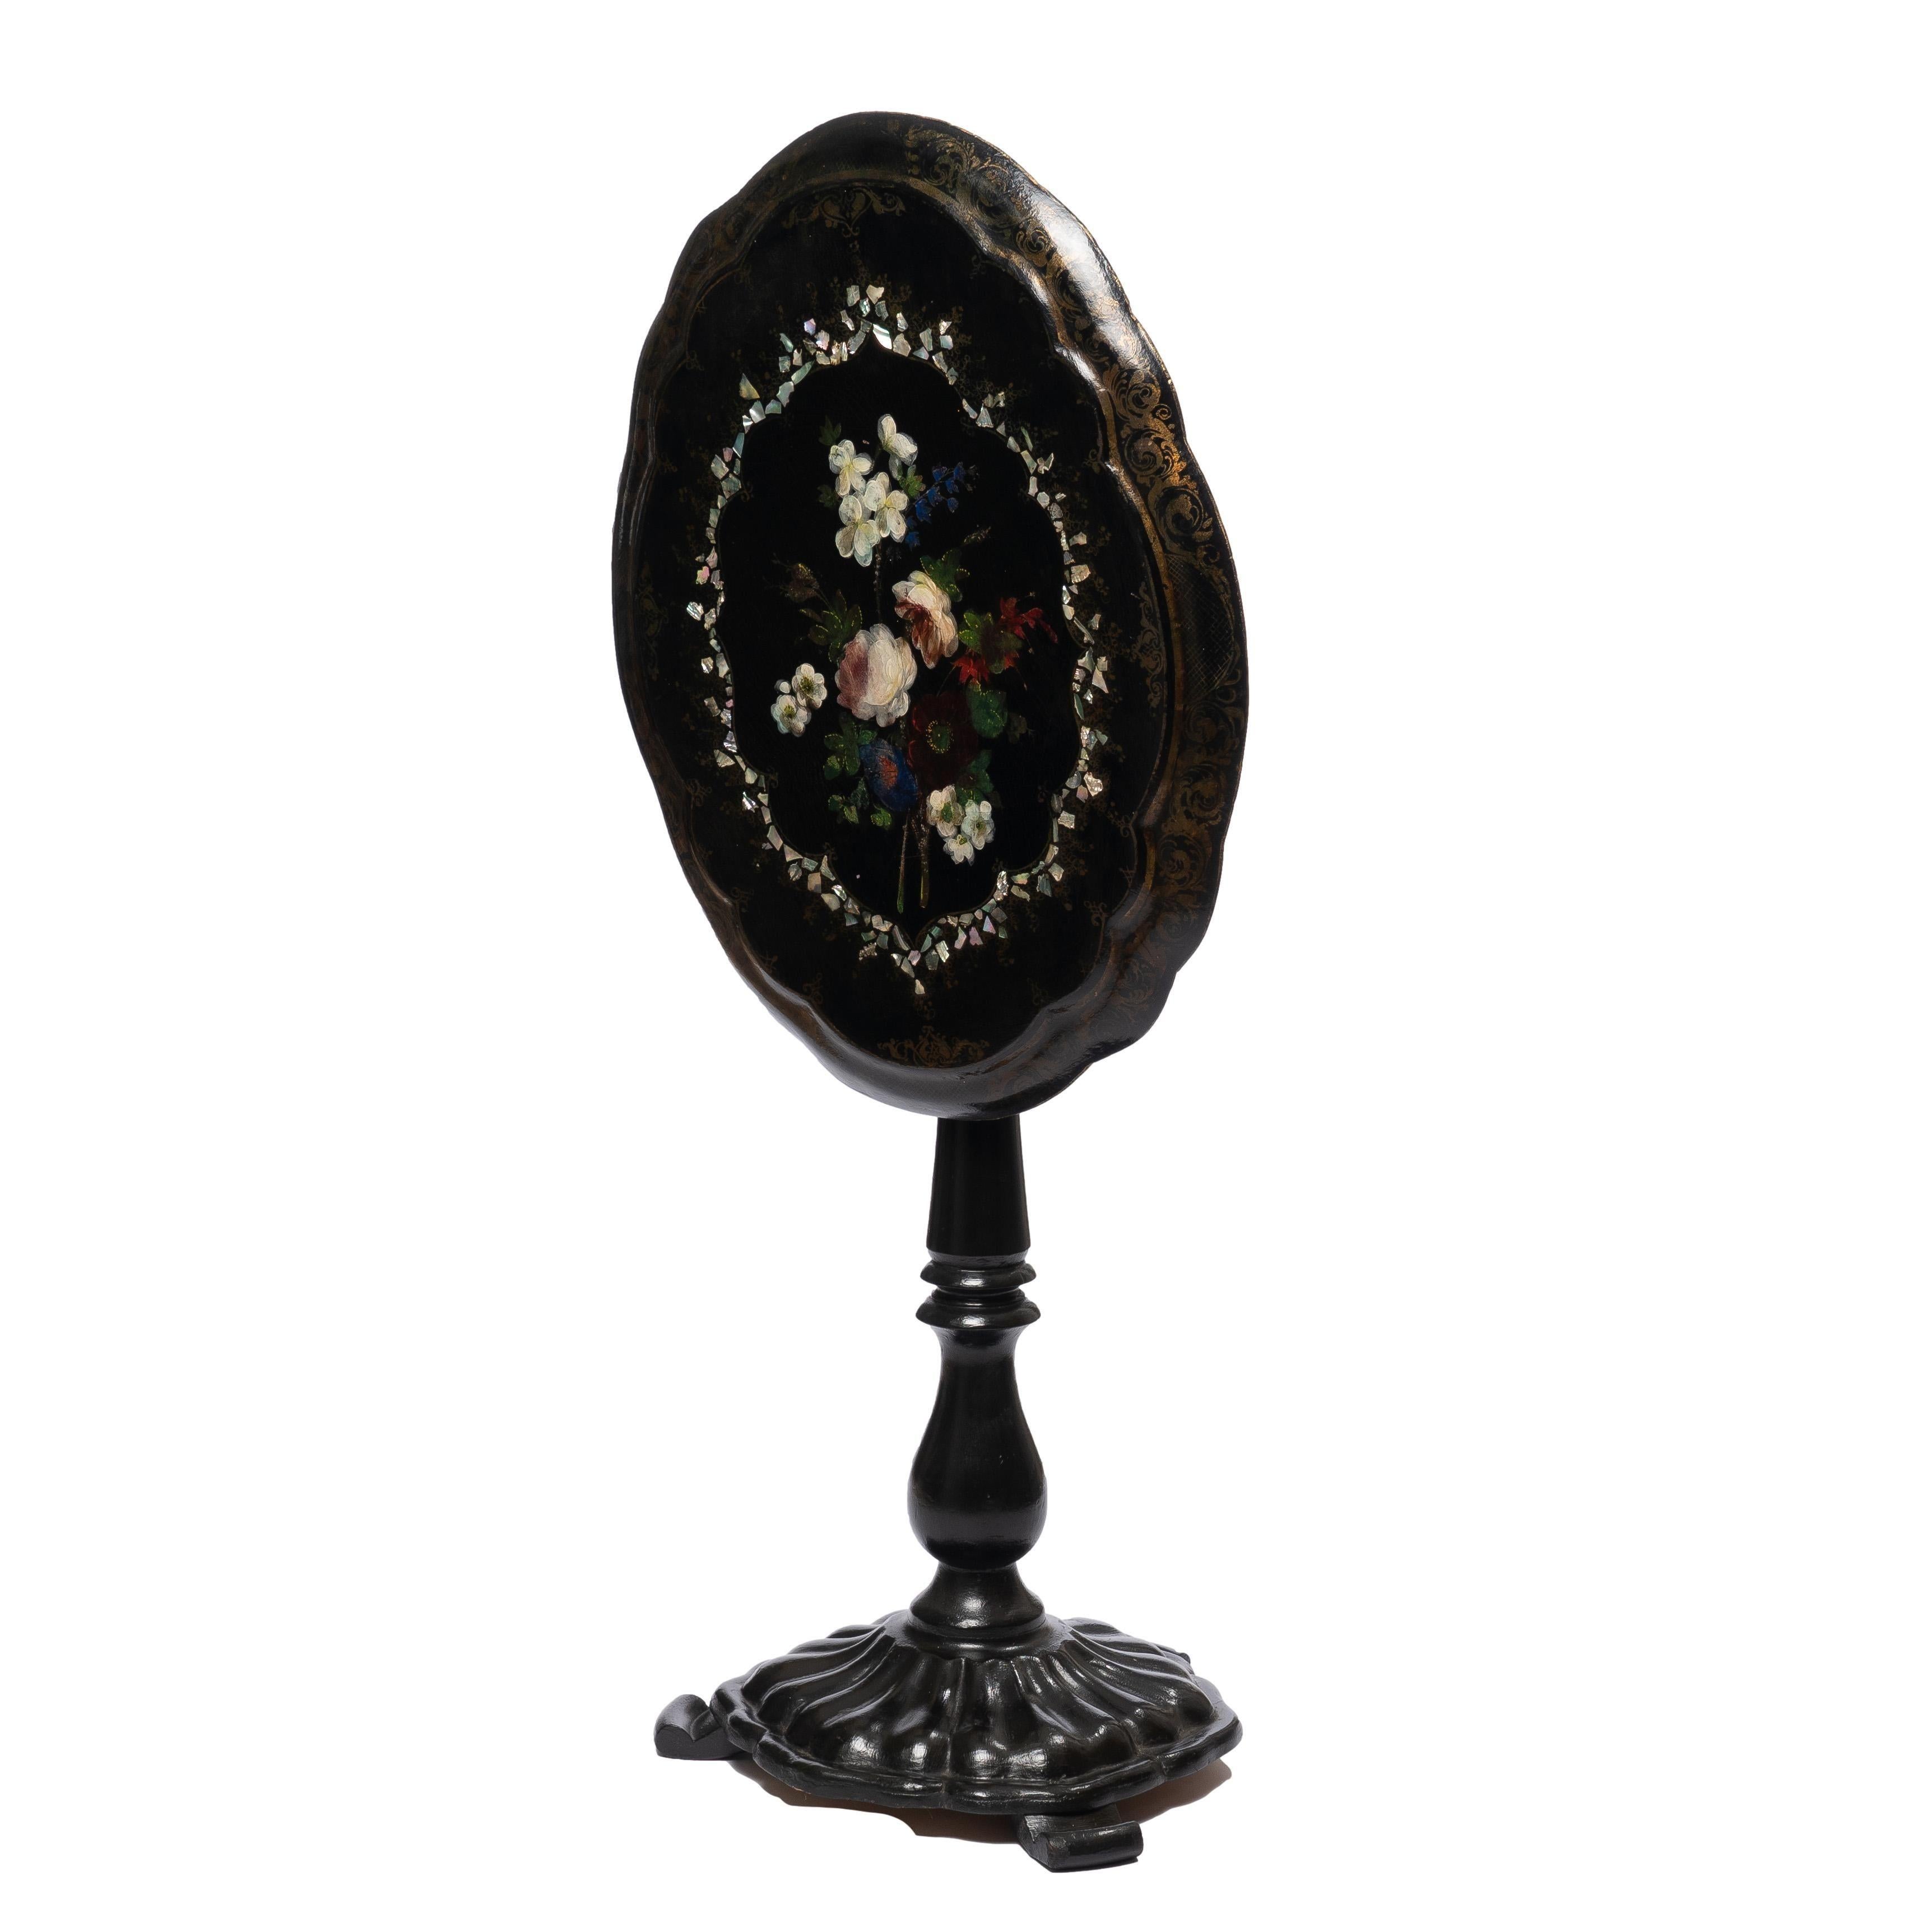 Mother-of-Pearl inlaid and floral painted quatrefoil form paper mache tilt top table. The top rests on a painted wood pedestal with molded base and on three scroll cut feet. The base has been weighted for stability.

England, circa 1860.